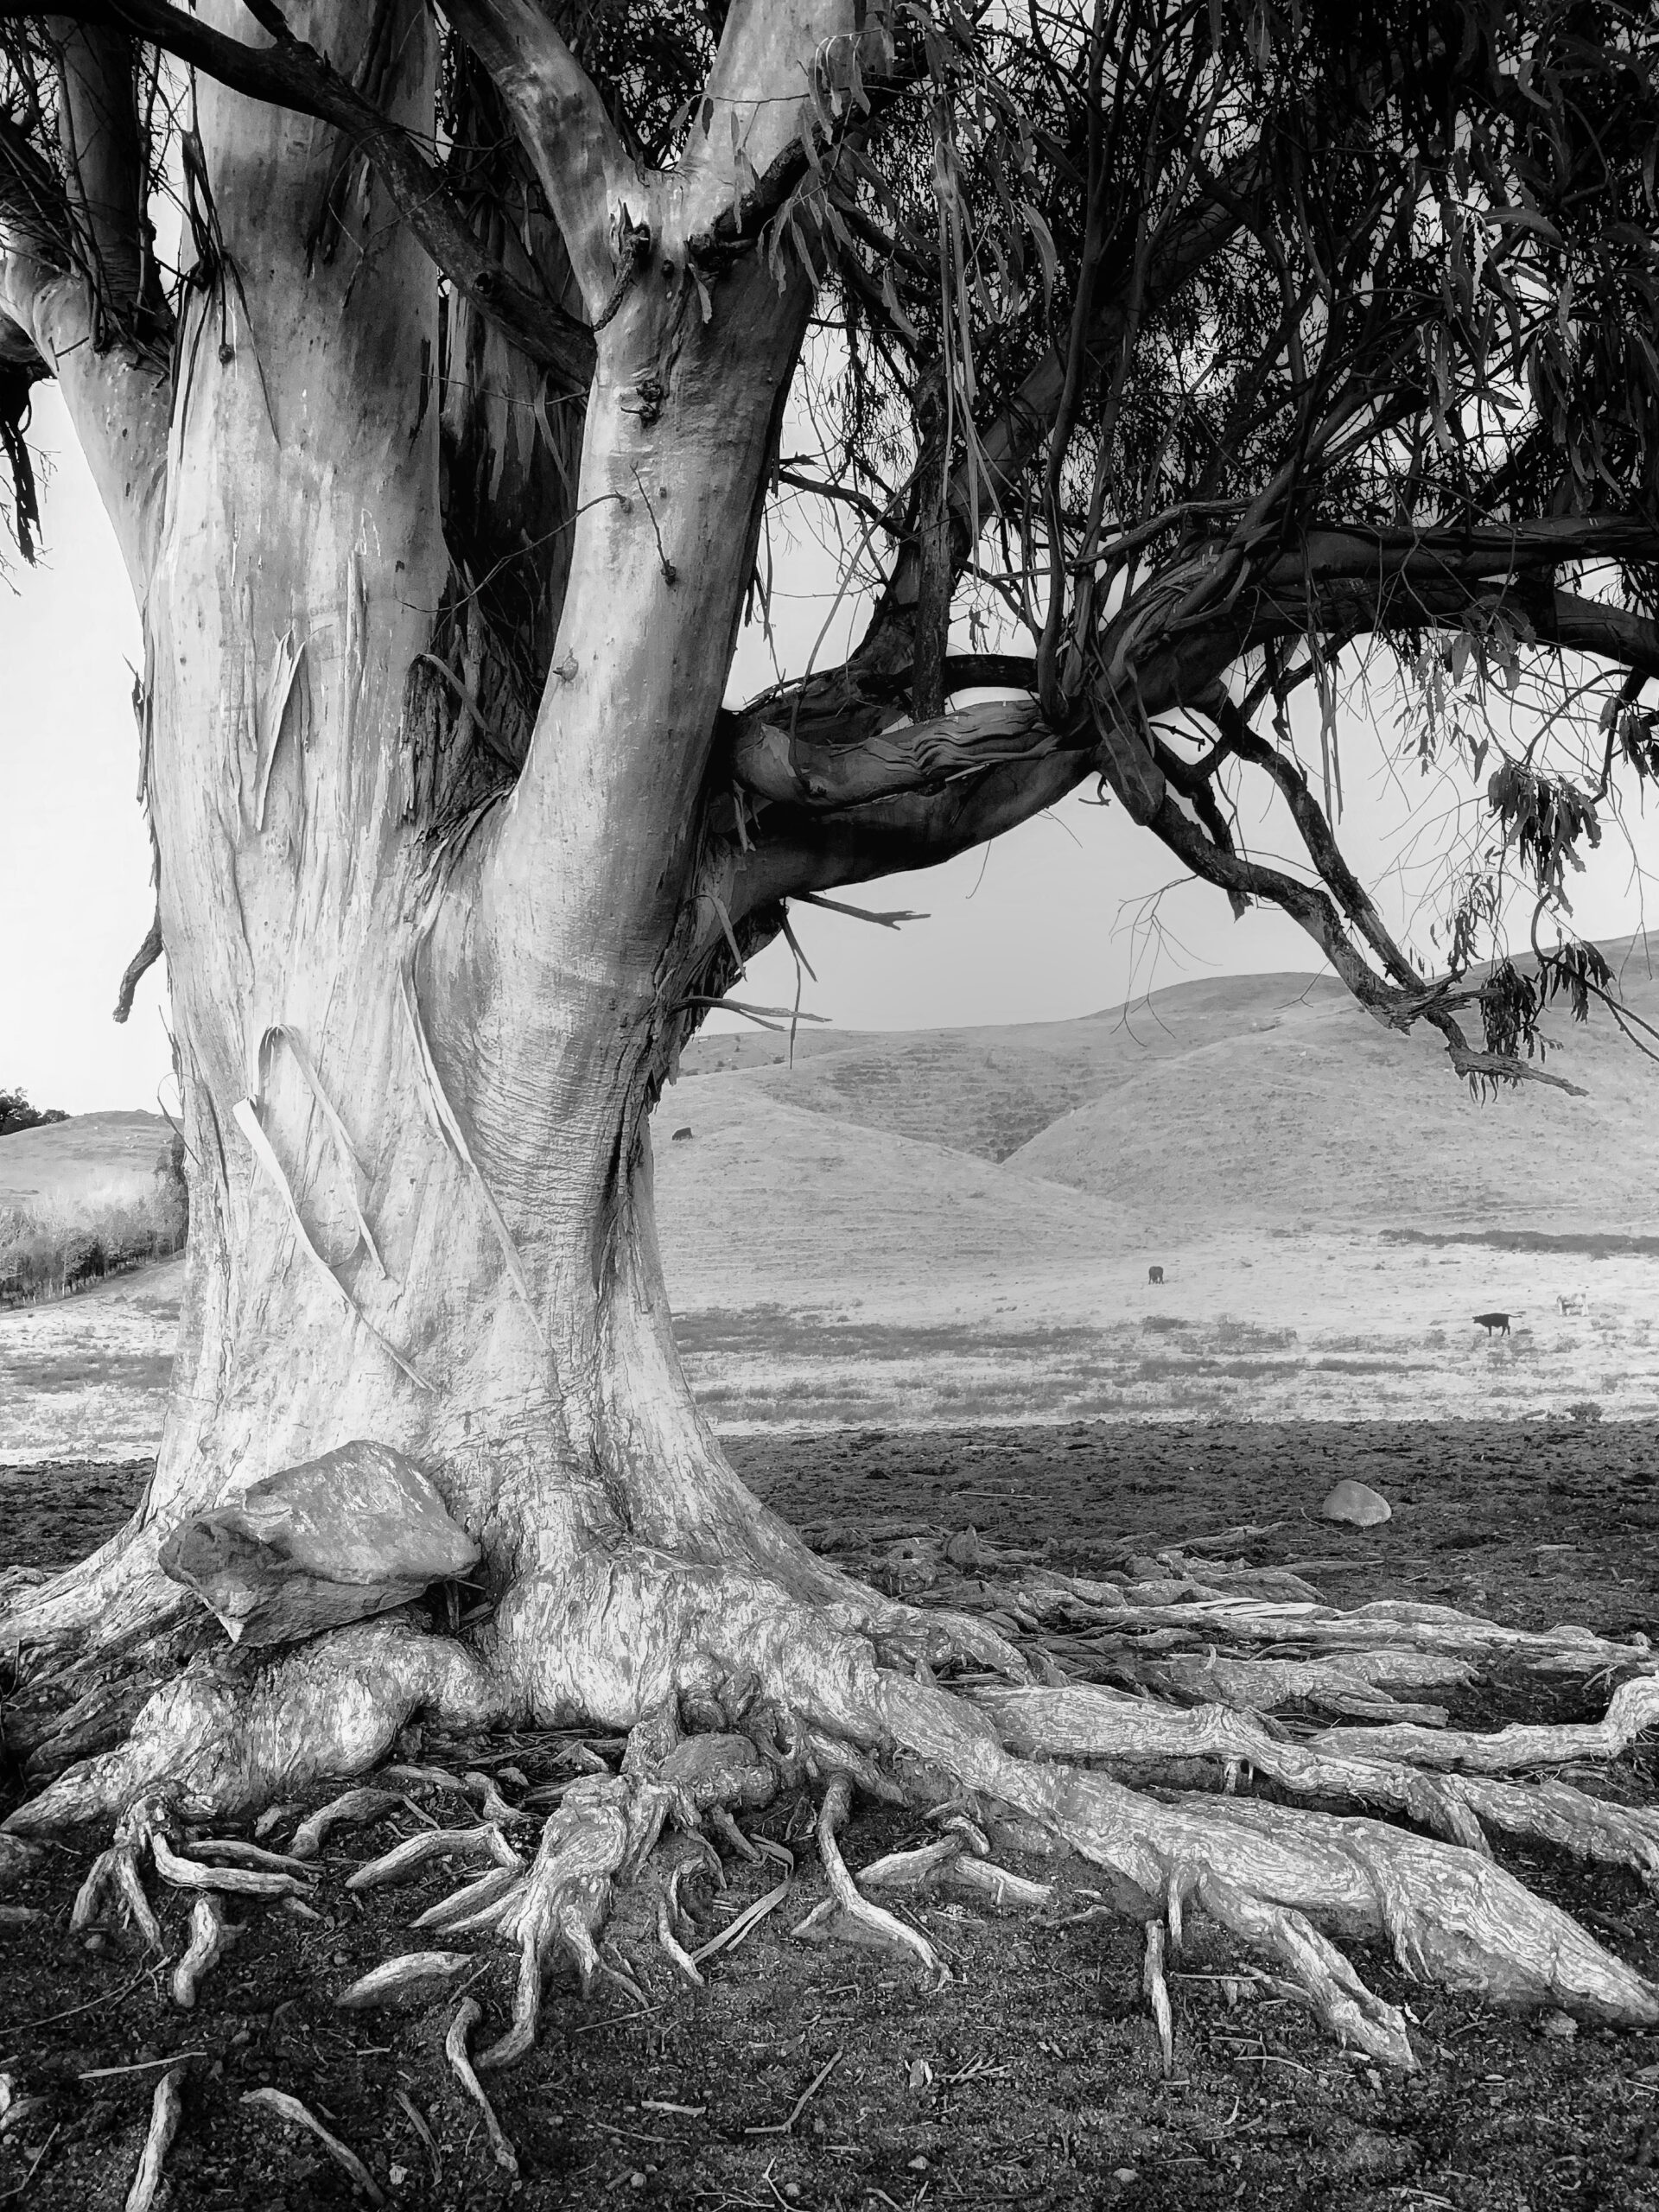 A black and white photograph of a tree with roots.